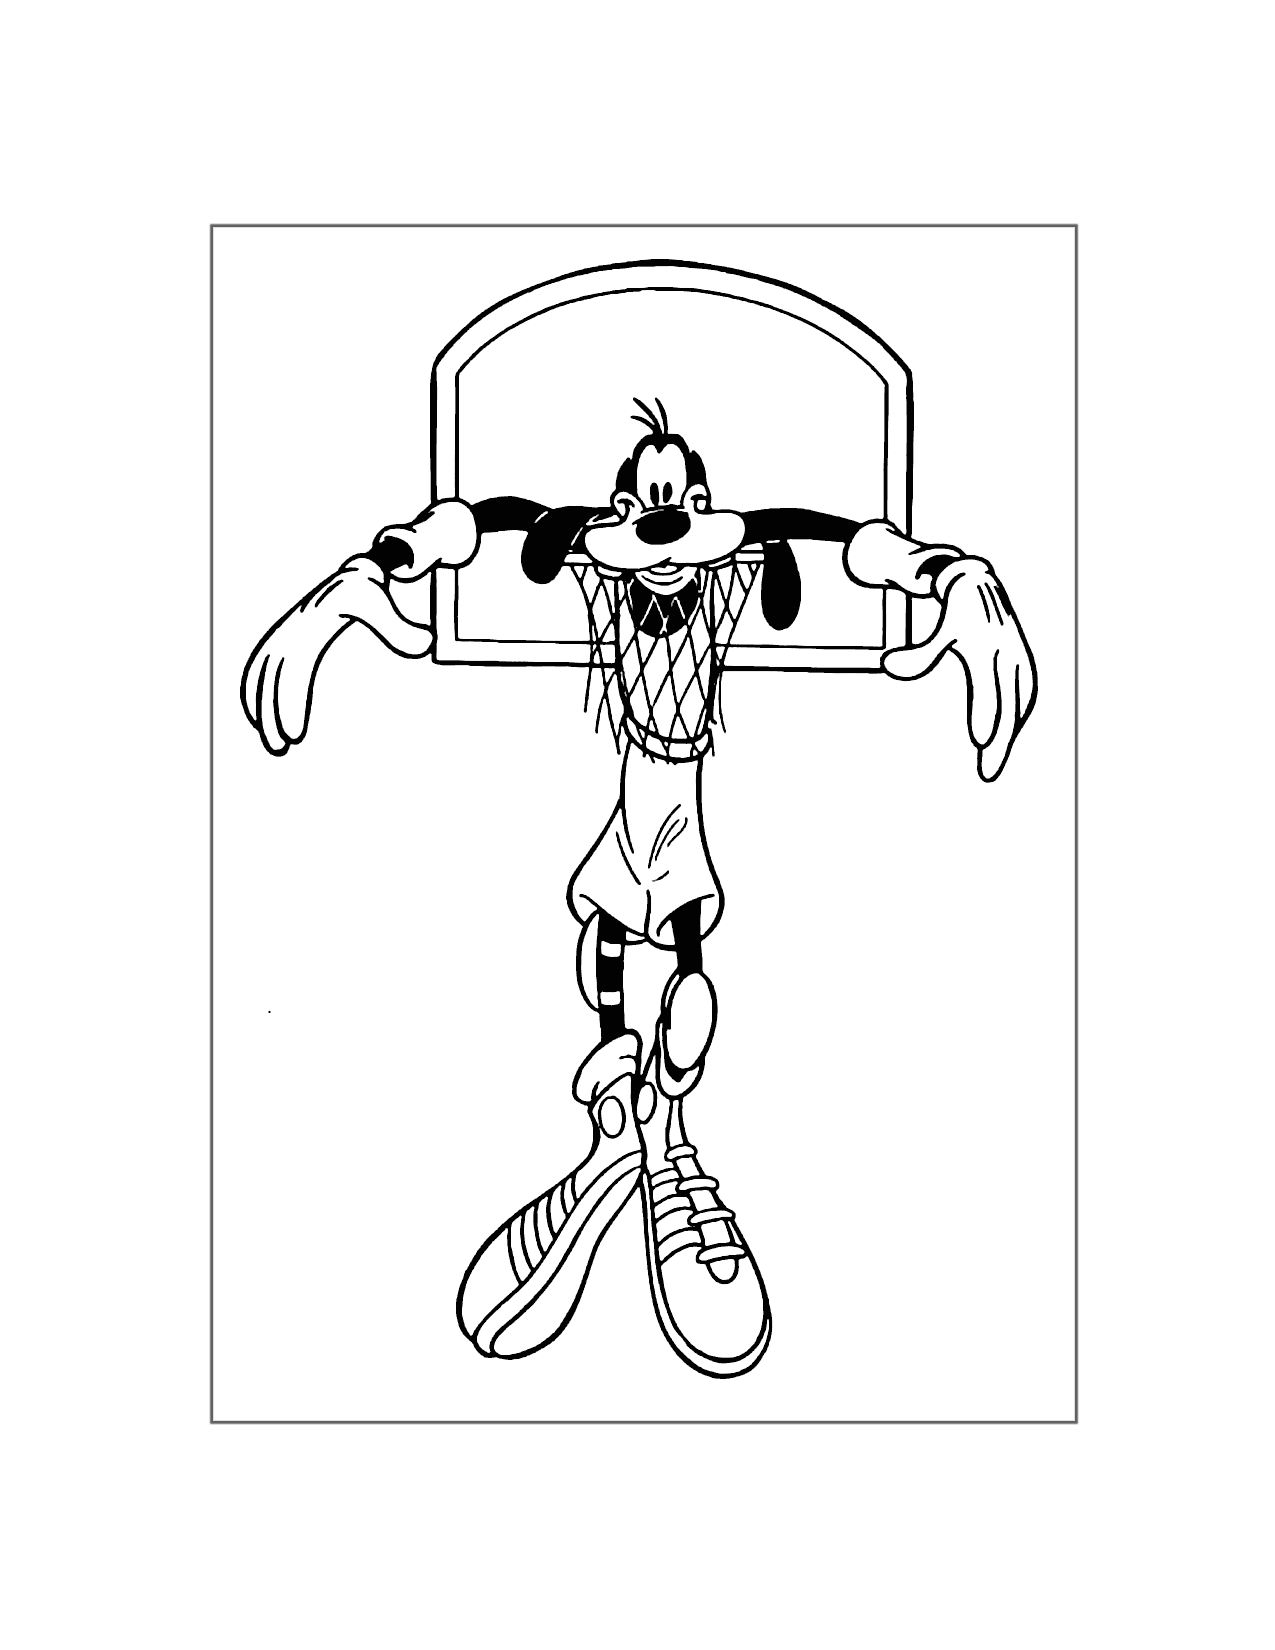 Goofy Dunked Himself Coloring Page